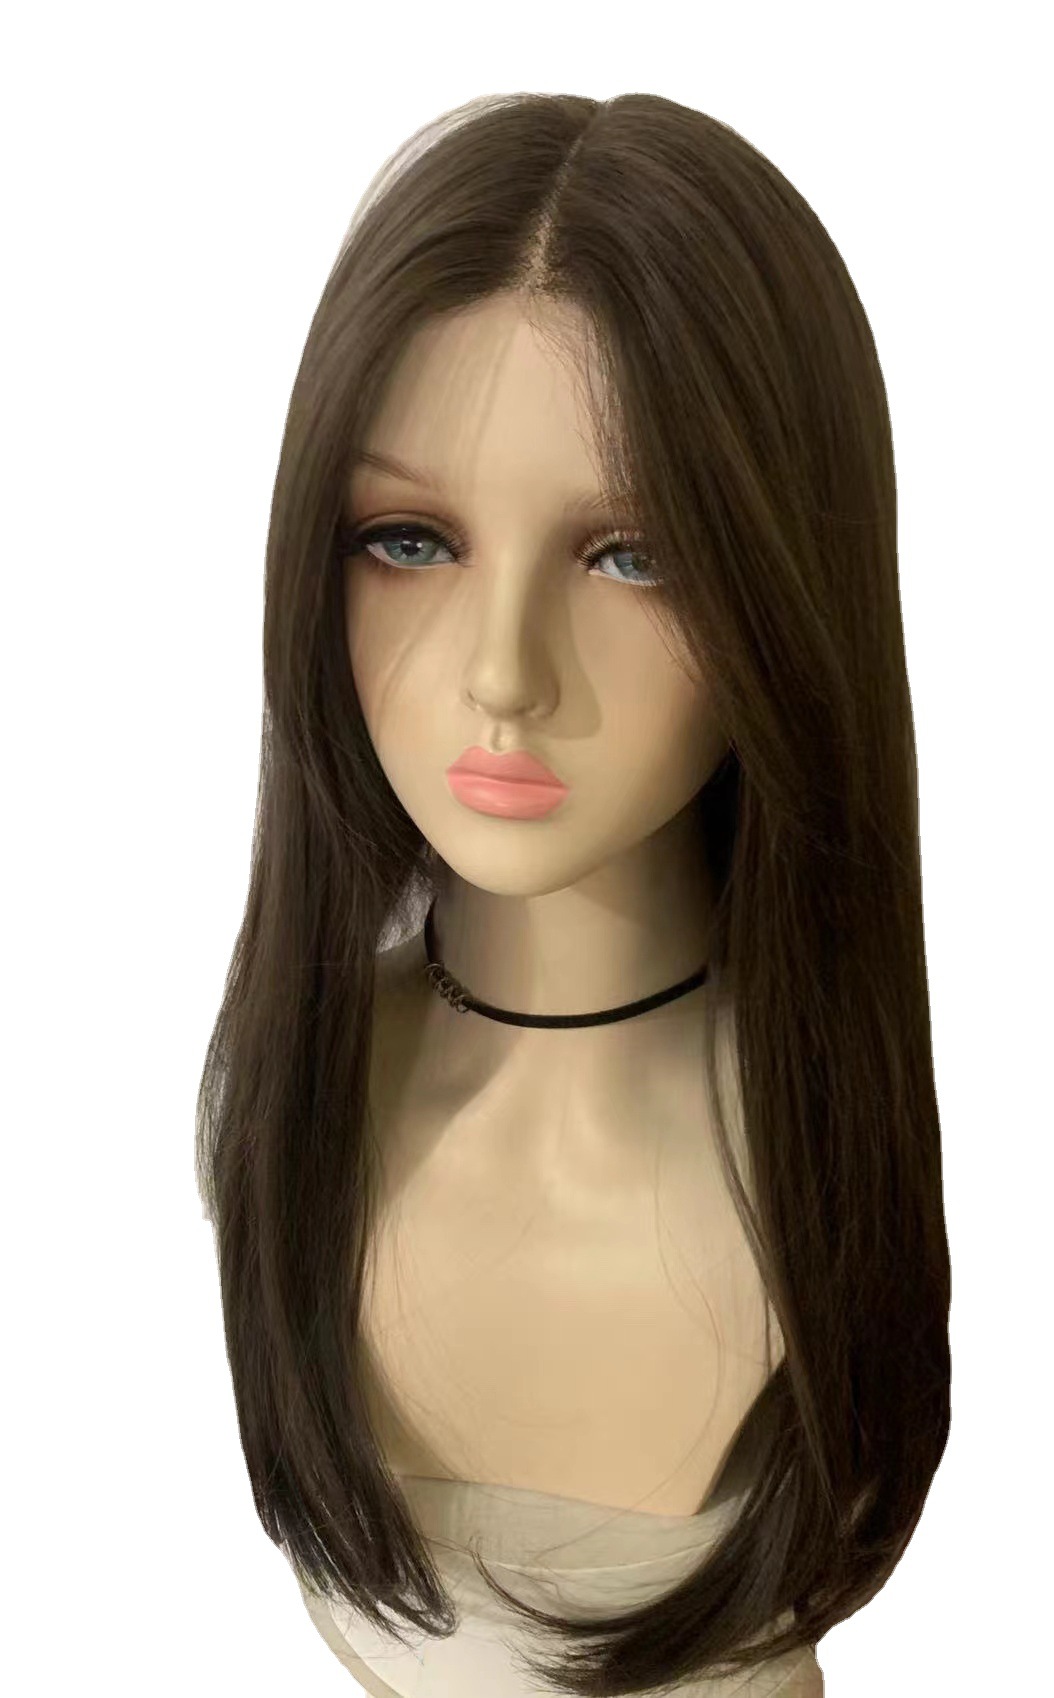 Best-Seller on Douyin Lace Wig Hand-Woven Front Lace Wig Women's Long Curly Hair Straight Hair Full-Head Wig Artificial Wig Wigs